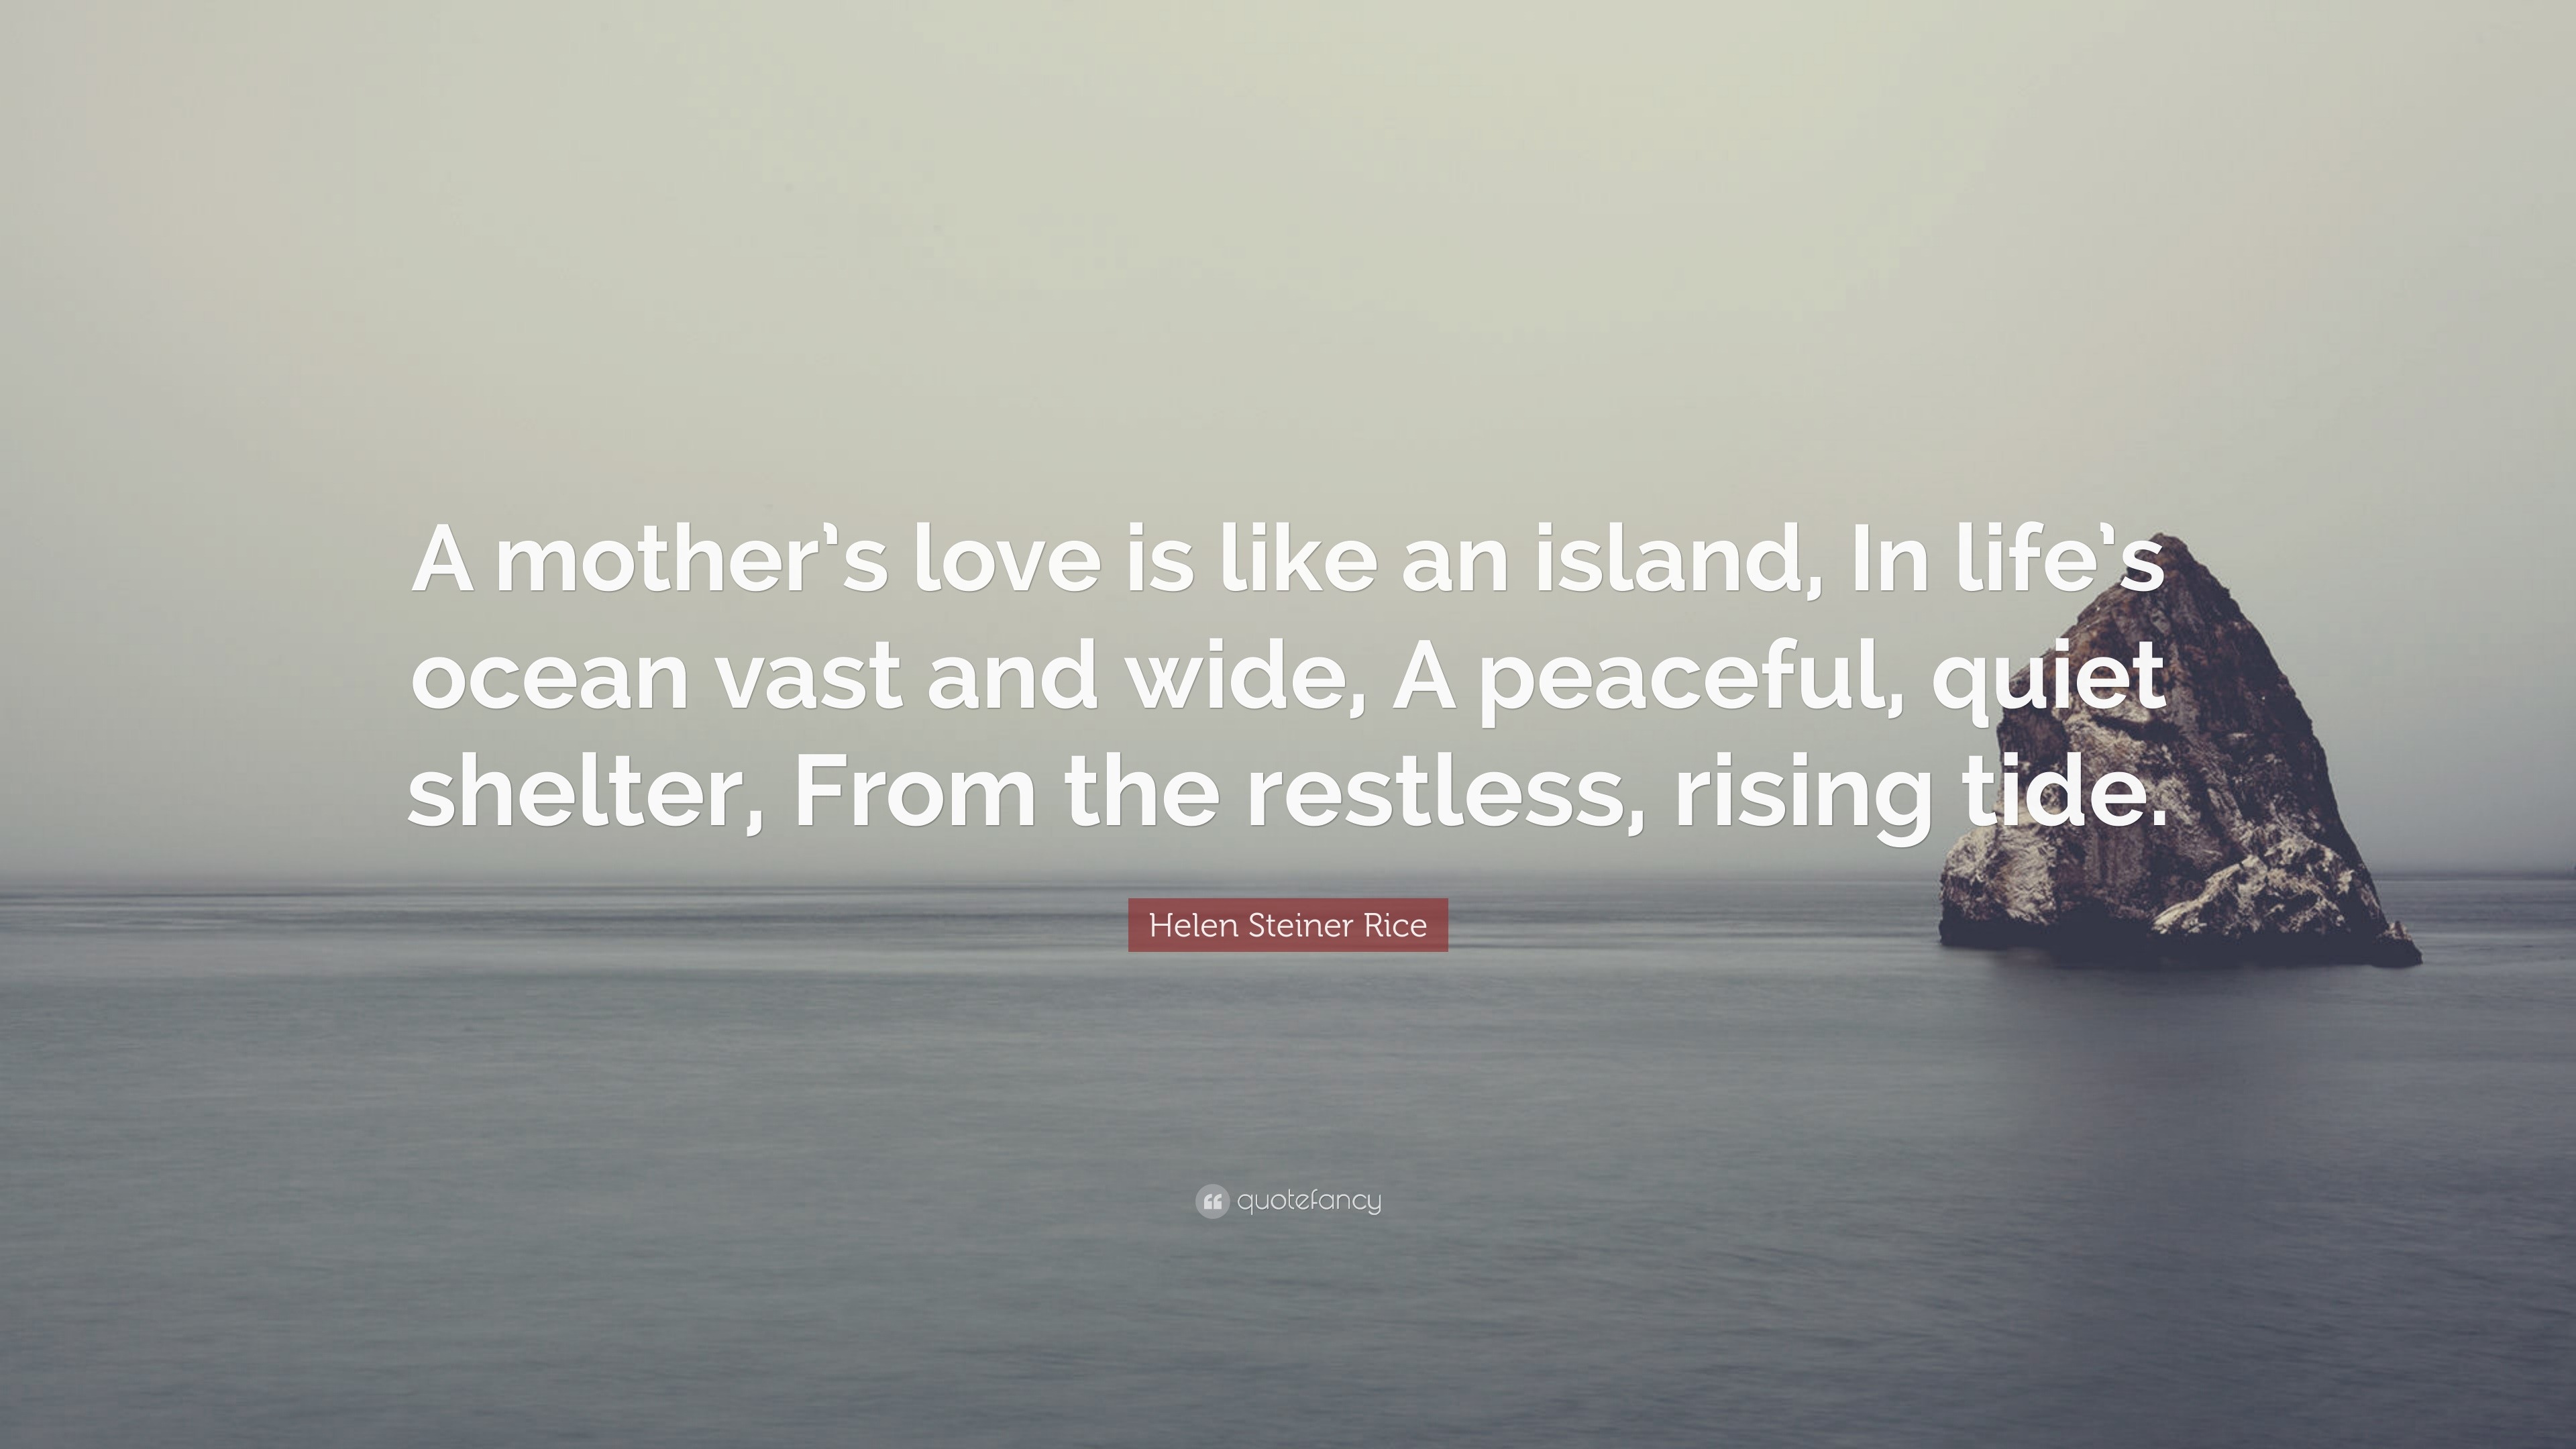 Helen Steiner Rice Quote “A mother s love is like an island In life s